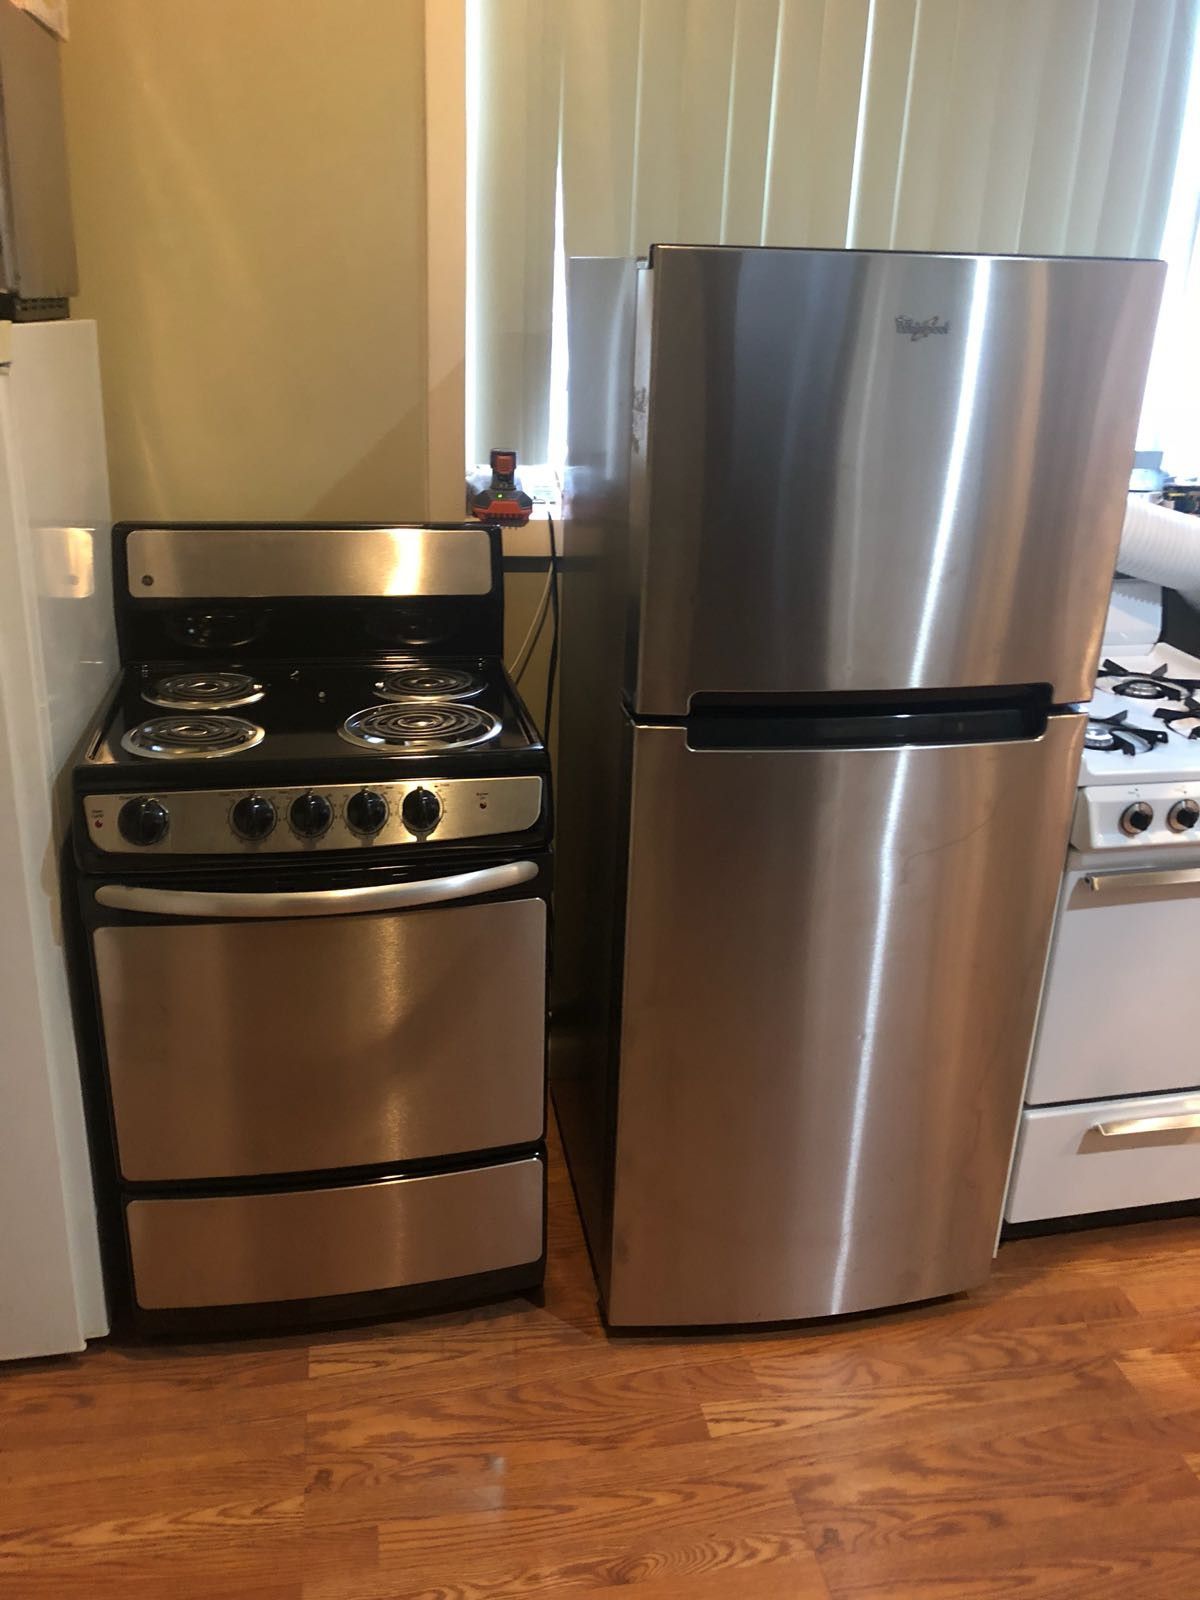 Whirlpool 24 inch wide refrigerator and GE 24 inch wide stove electric set